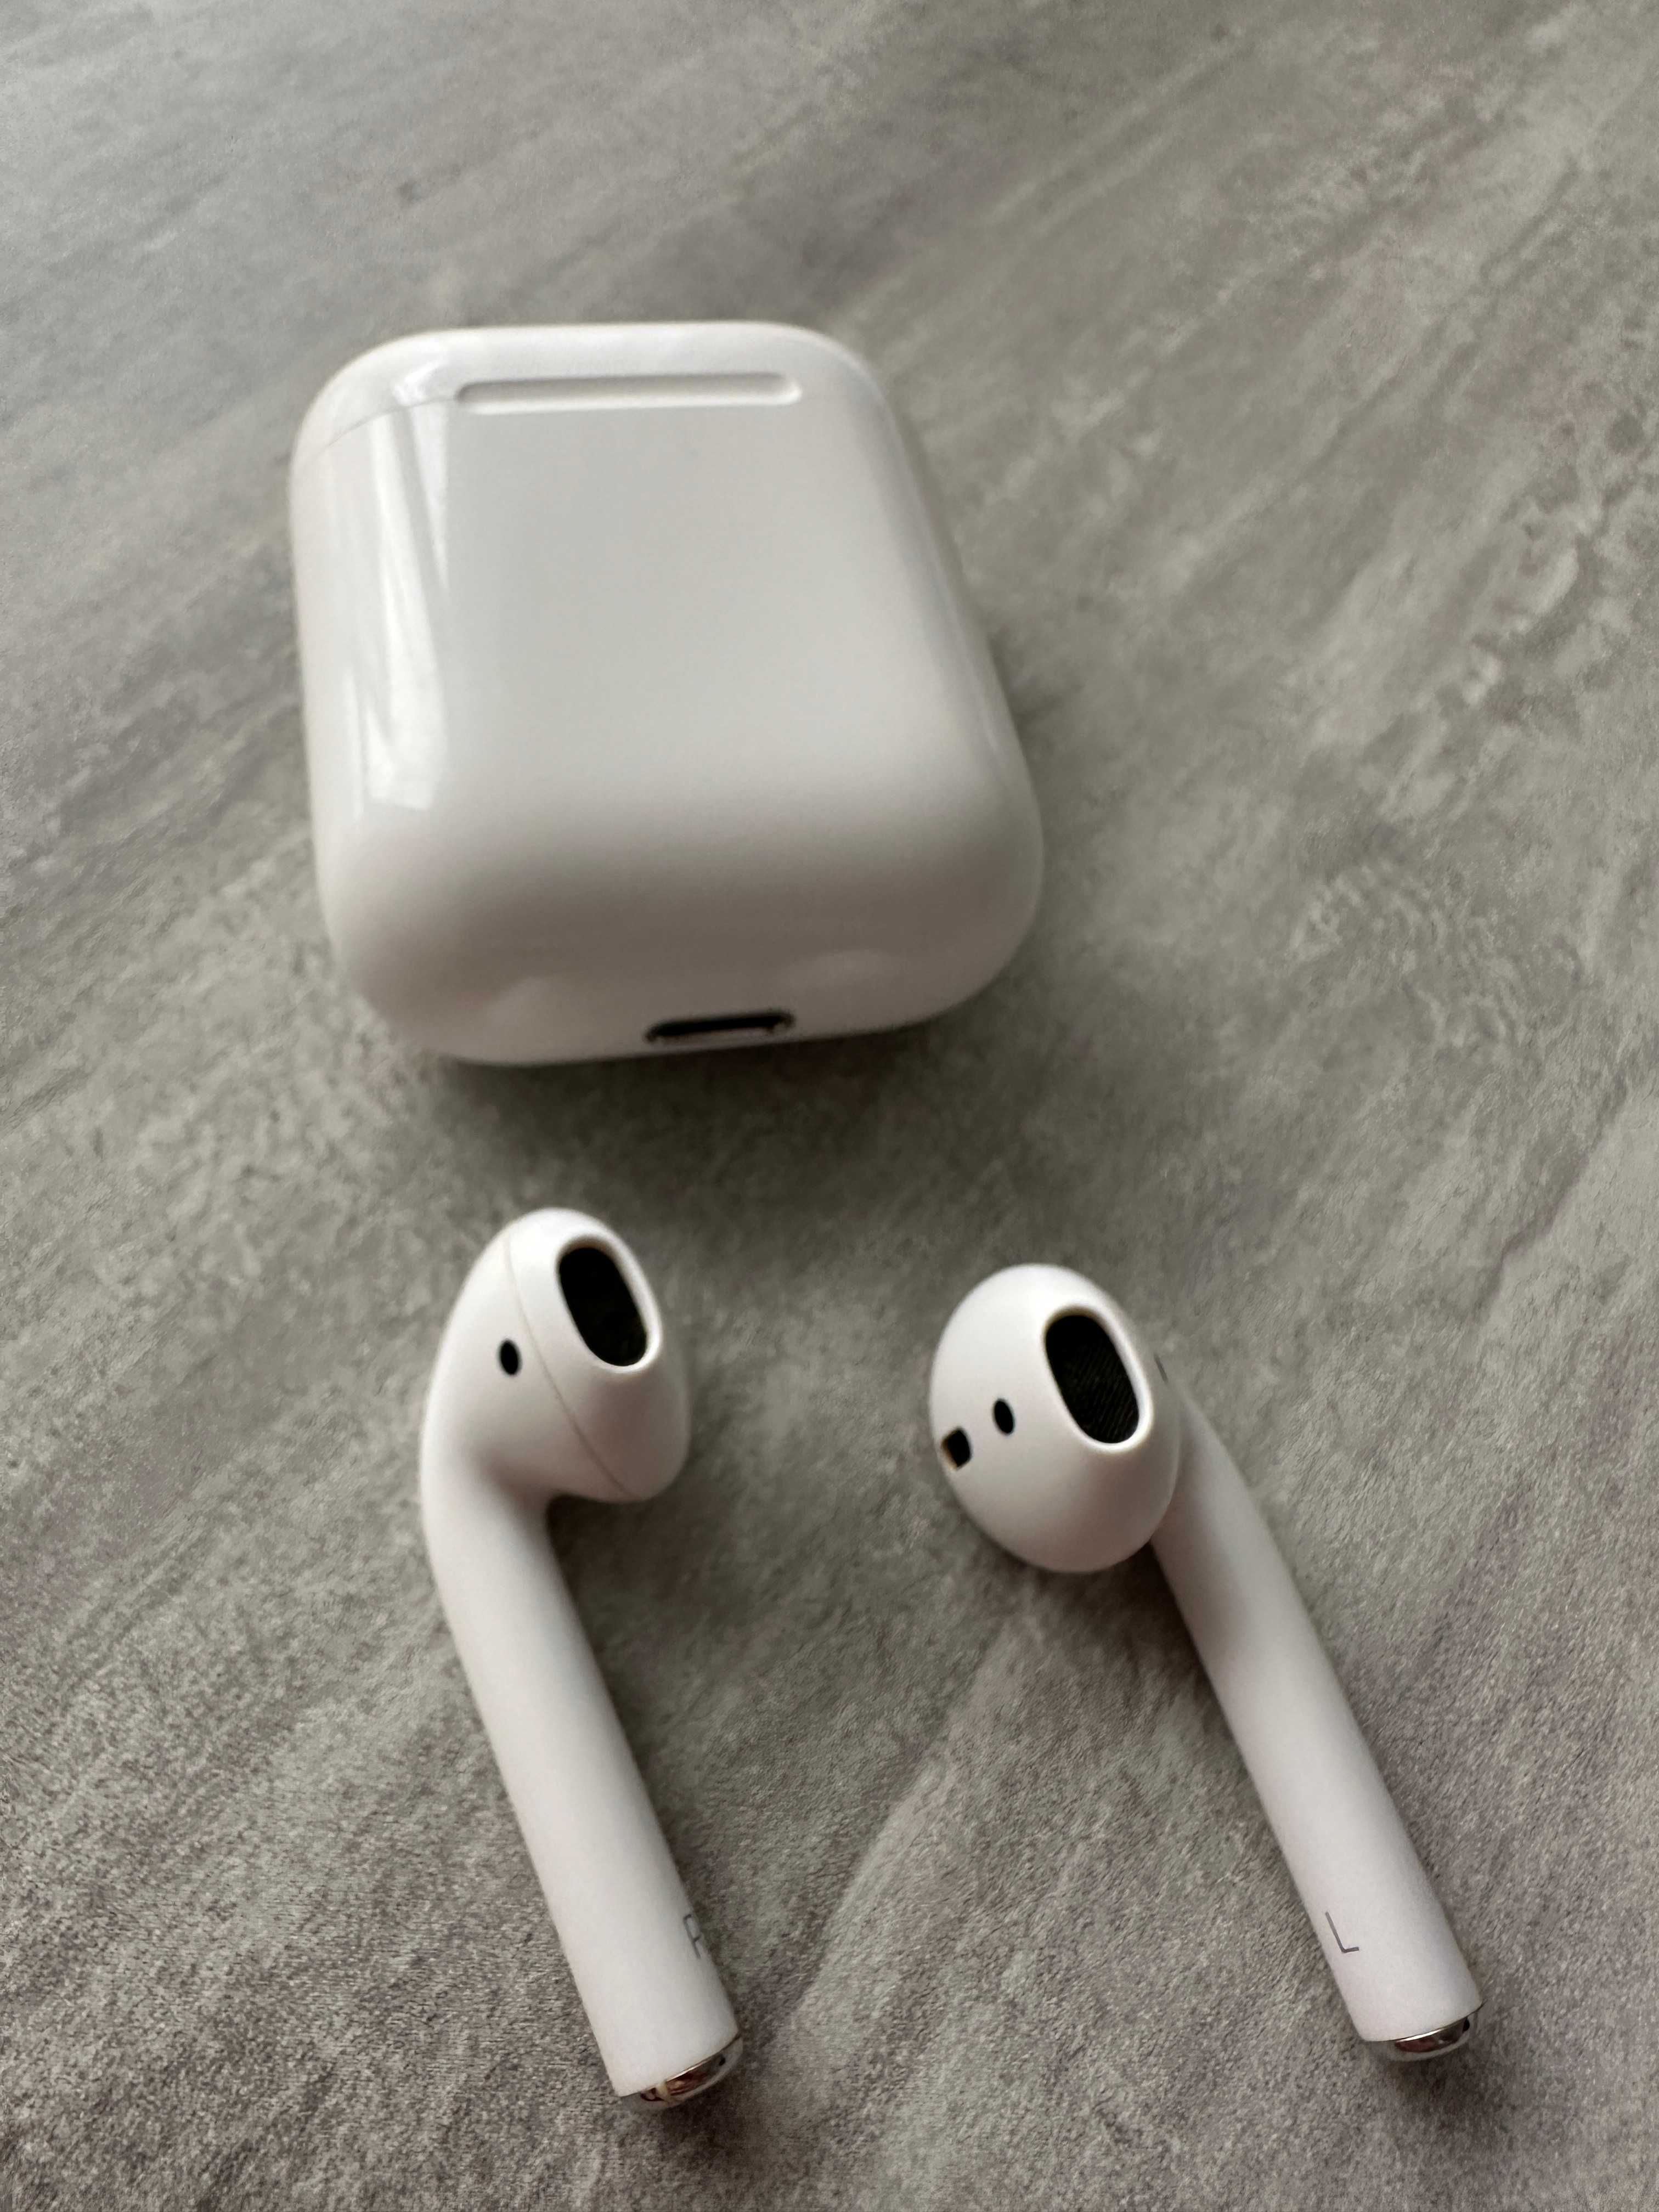 Apple Airpods 1 wireless